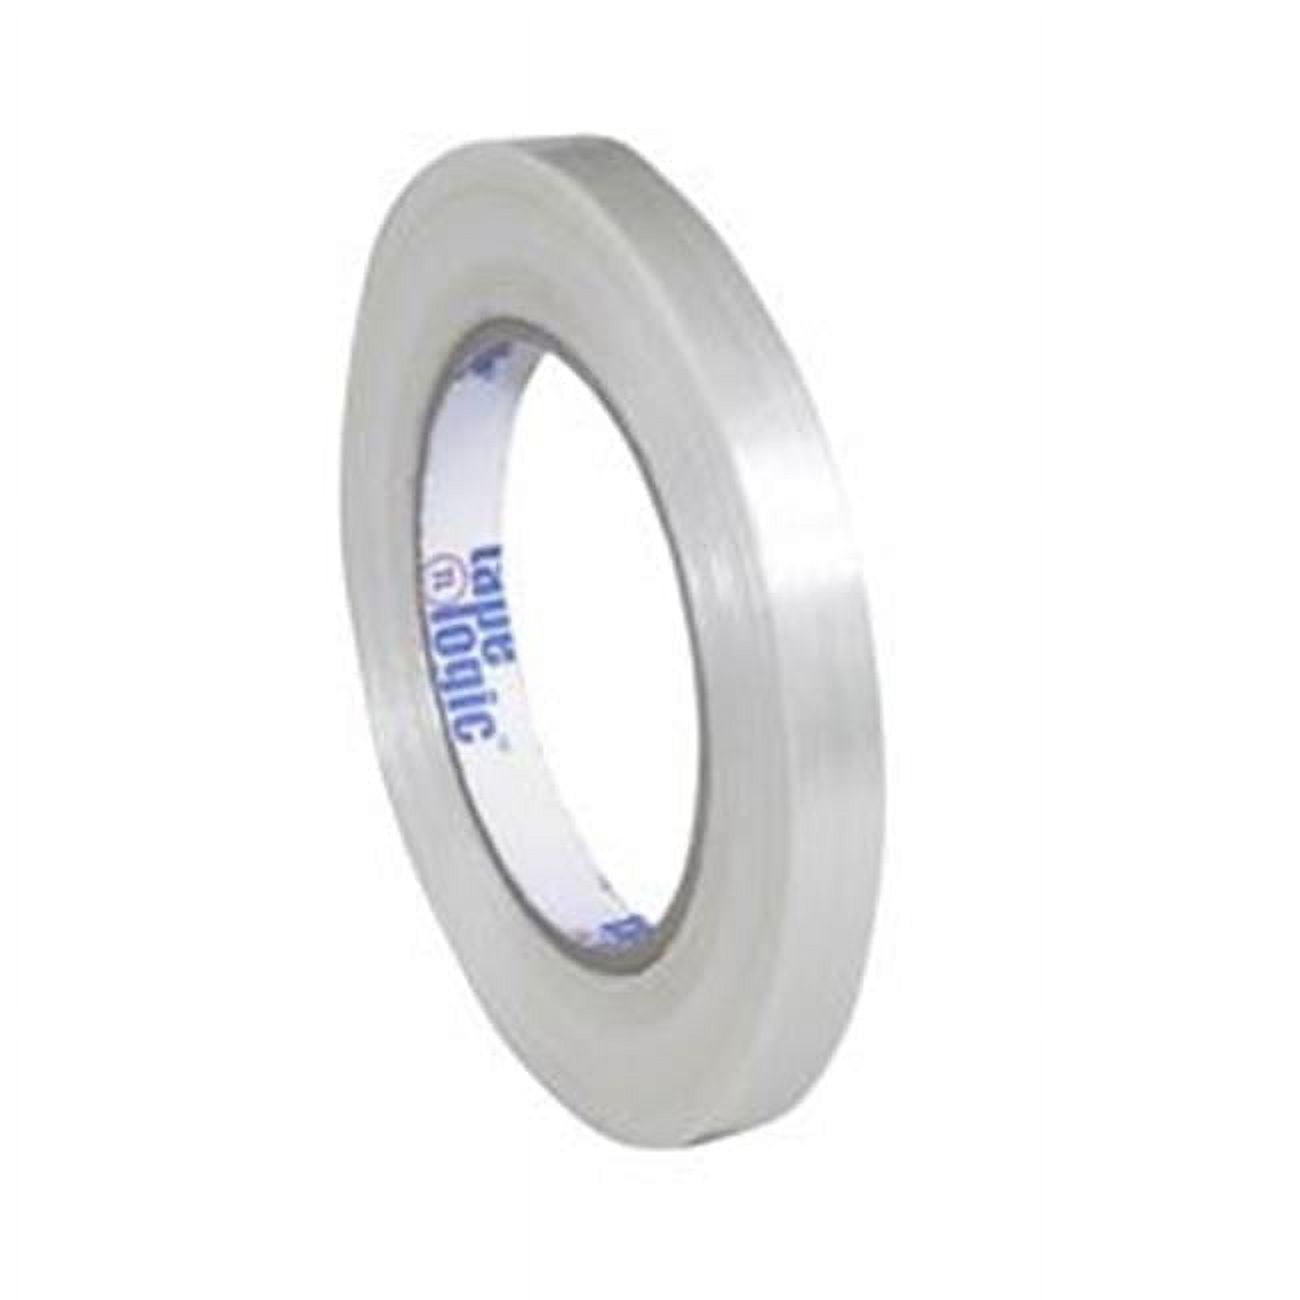 UPC 848109022376 product image for Tape Logic T913150012PK 0.50 in. x 60 yards 1500 Strapping Tape, Clear - Pack of | upcitemdb.com